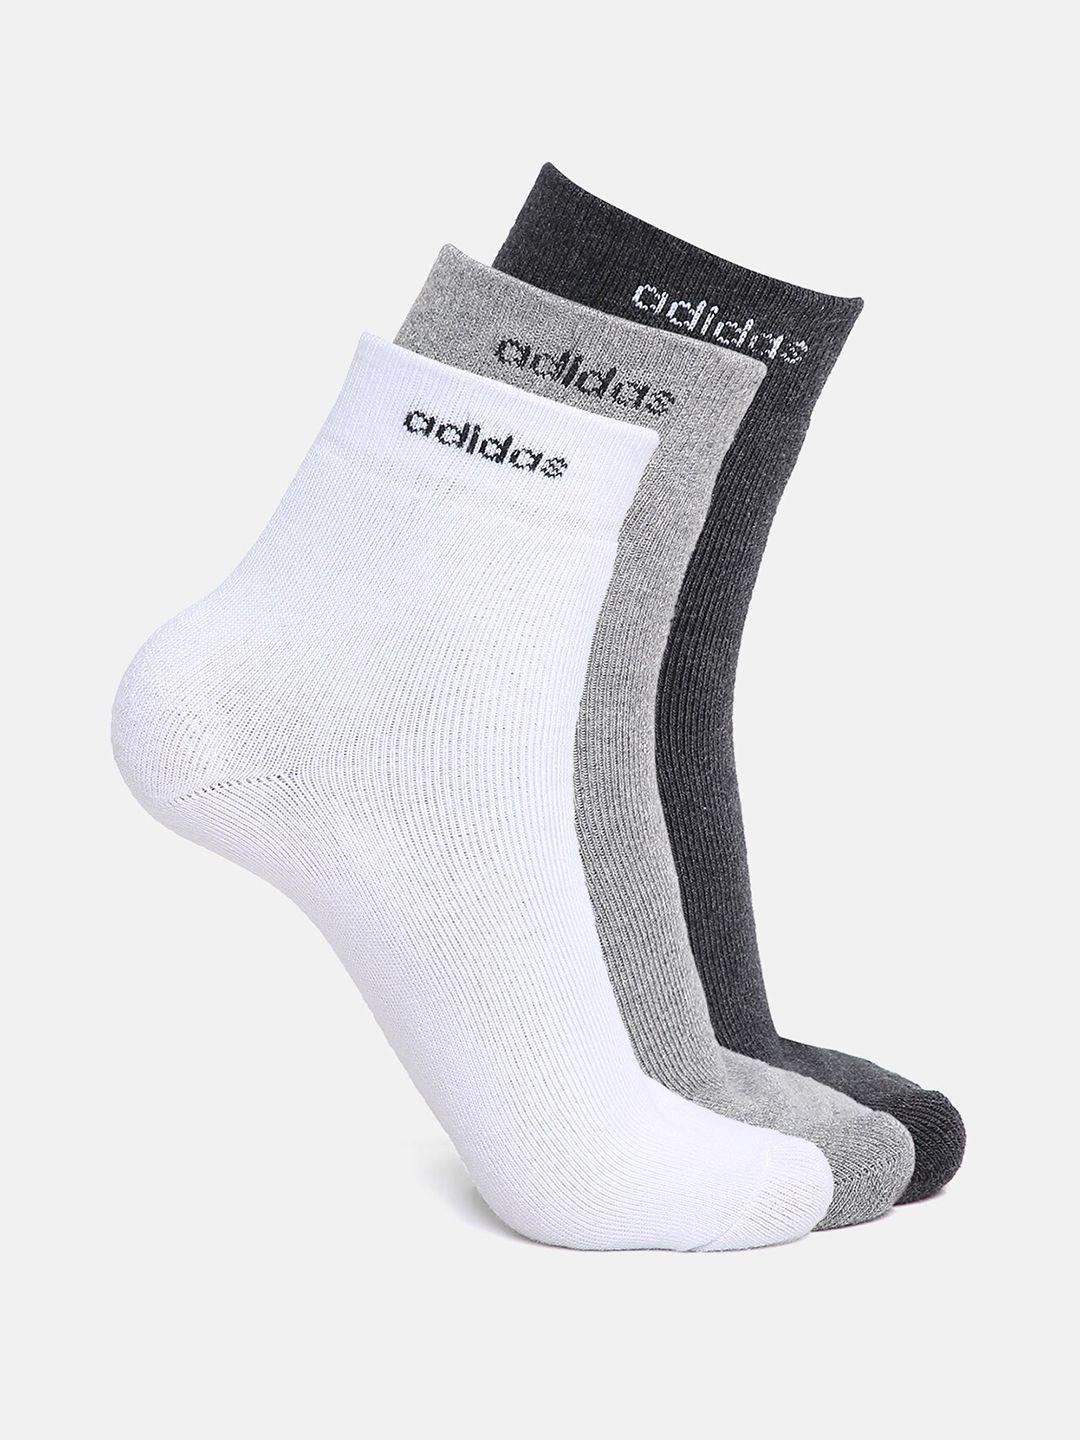 adidas-men-pack-of-3-grey-&-charcoal-solid-ankle-length-socks